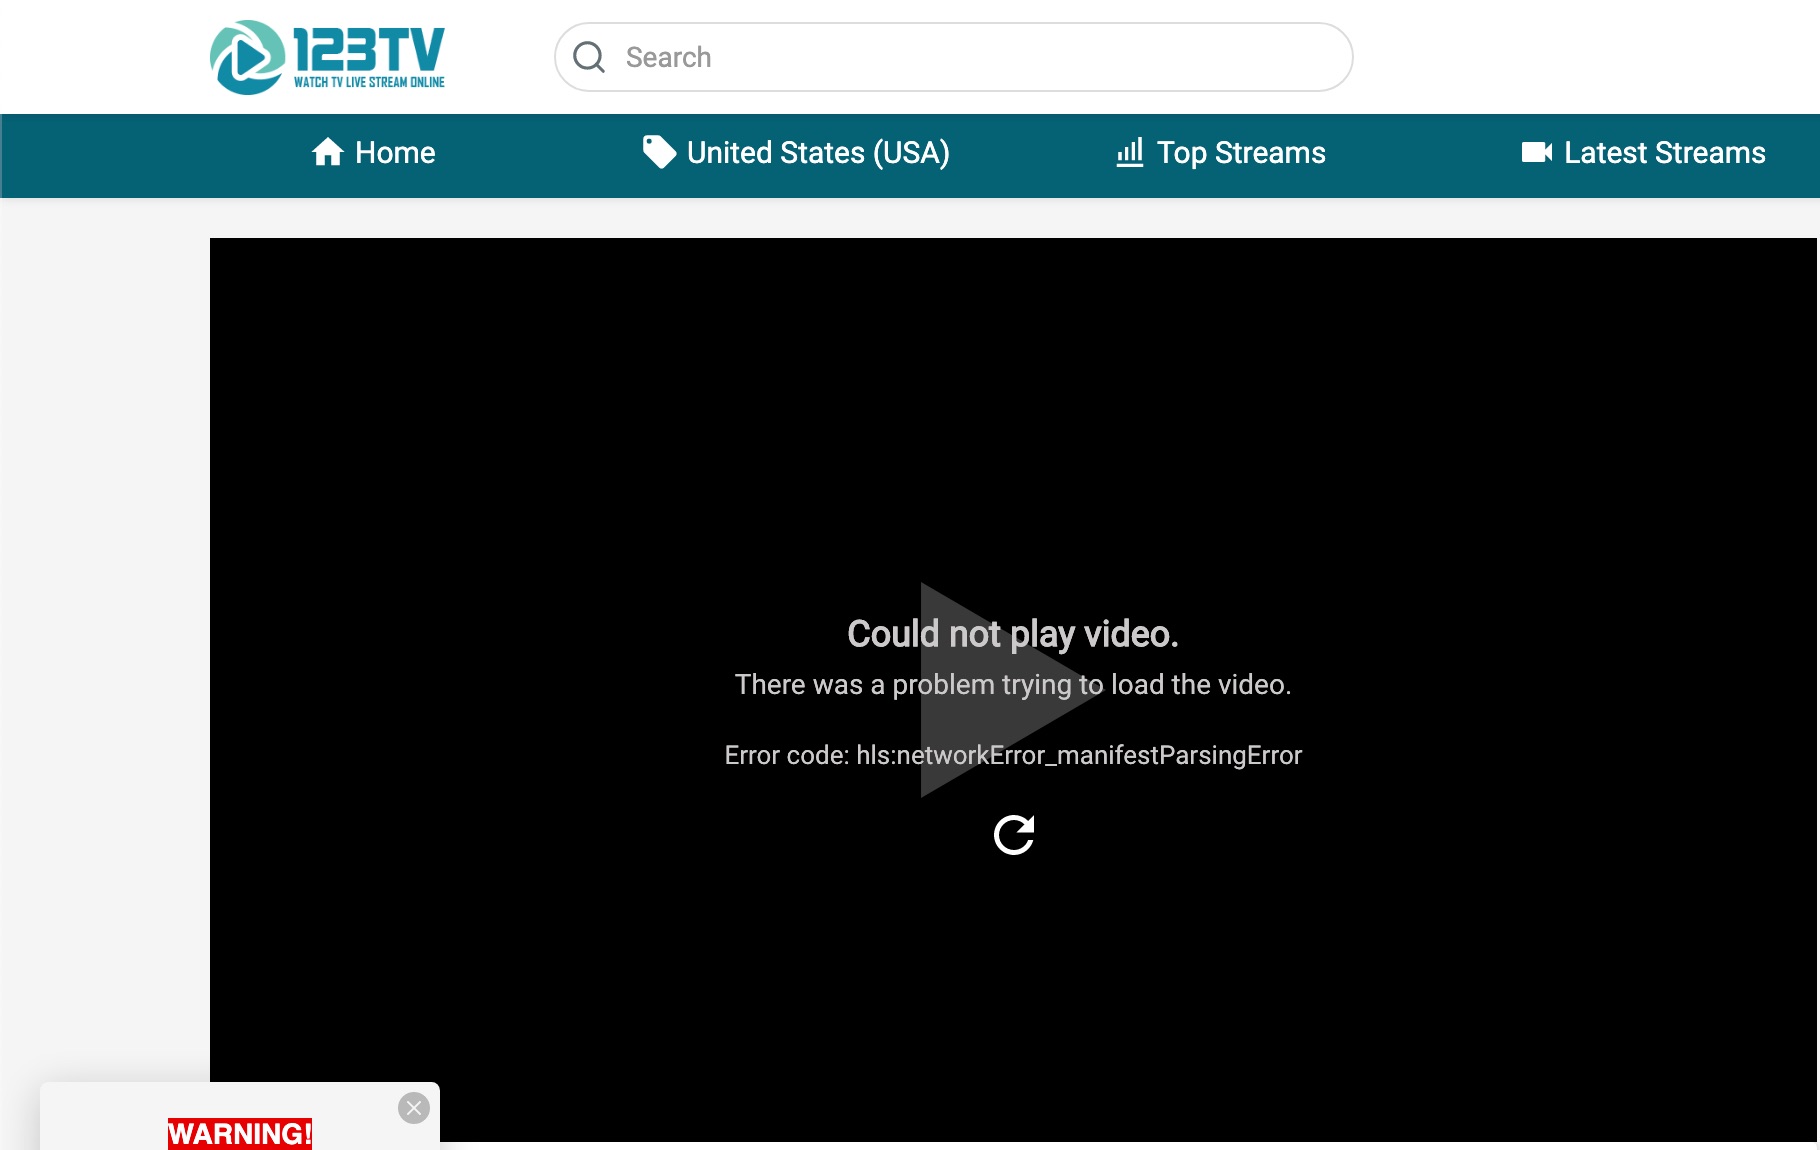 123Tv.LIve Cloud Not Play Video, There was a Problem Trying to Load the Video